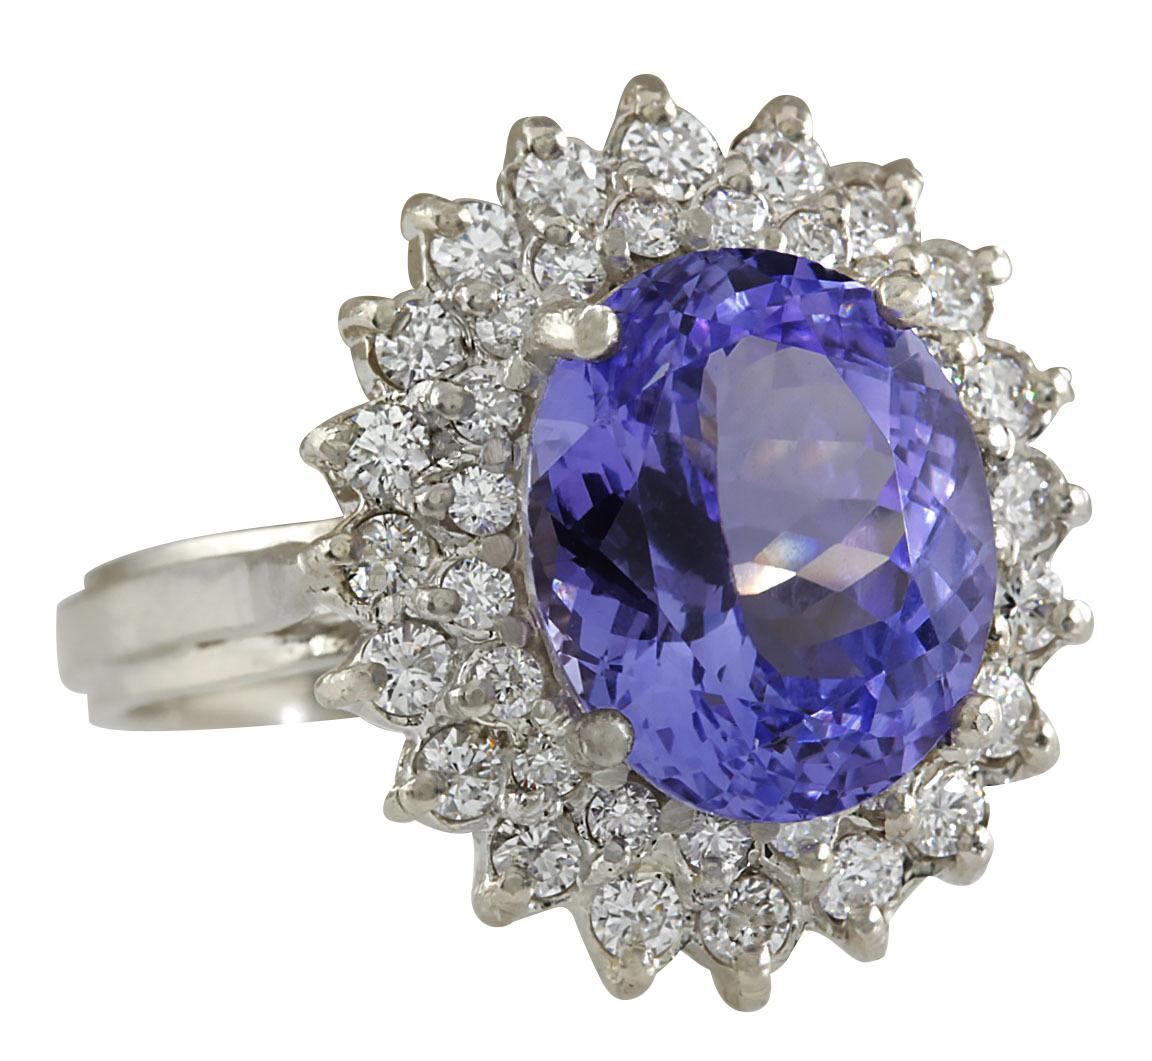 Presenting our exquisite 6.18 Carat Natural Tanzanite 14 Karat White Gold Diamond Ring. Crafted with precision and elegance, this ring is stamped with authenticity, ensuring its quality. Weighing 7.3 grams in total, it's both substantial and